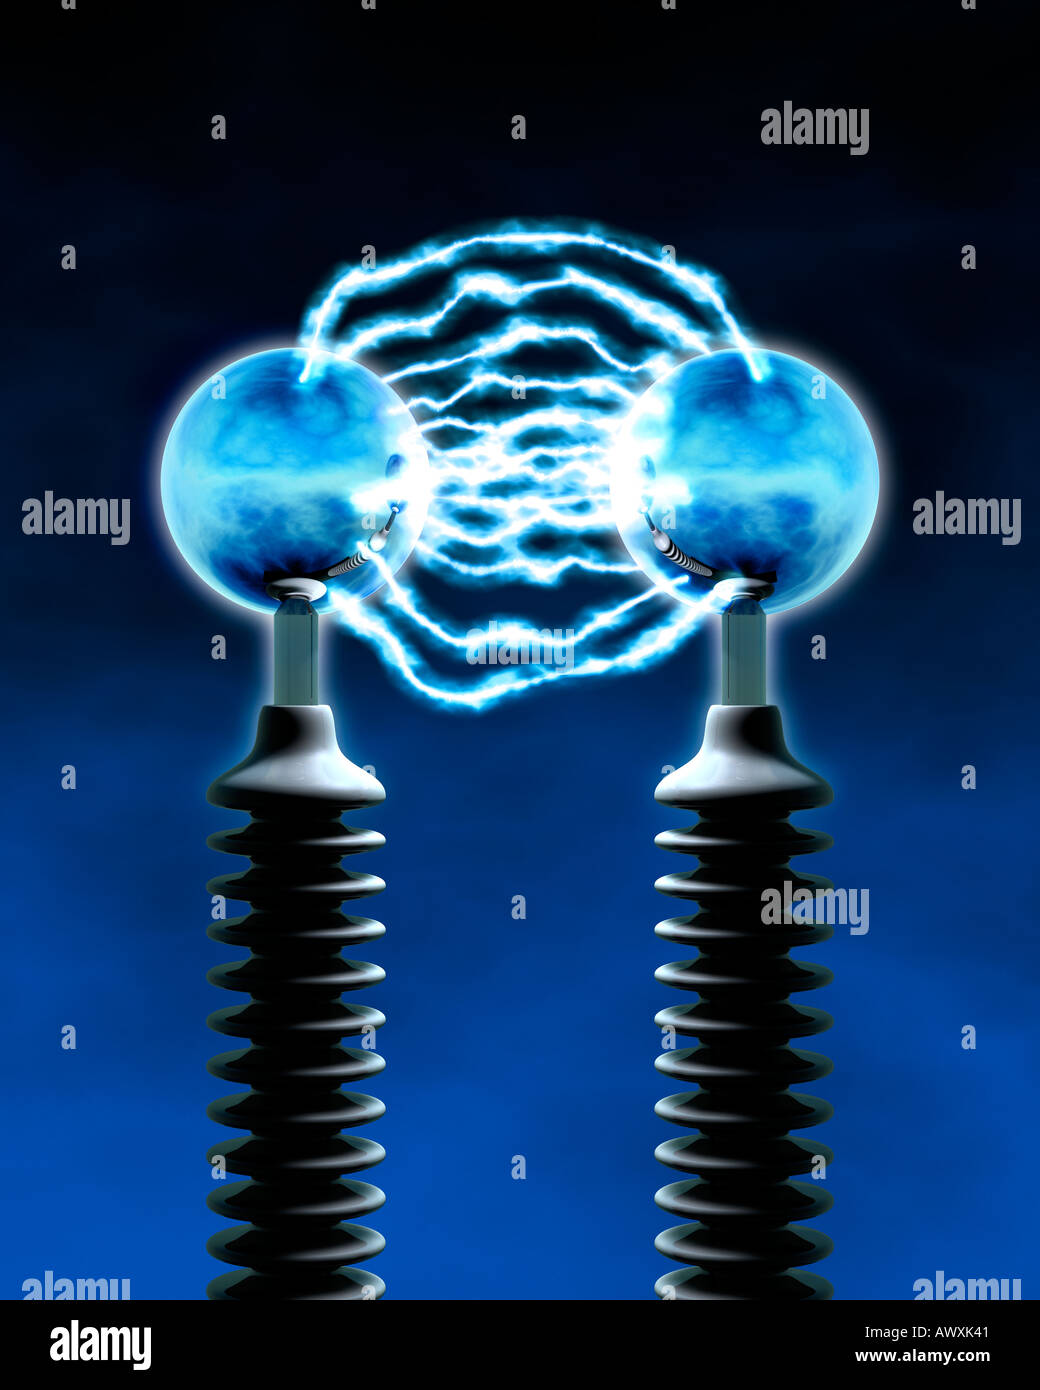 between two electrodes one can see electric lightning flash symbol of energy electricity current voltage power potential danger Stock Photo